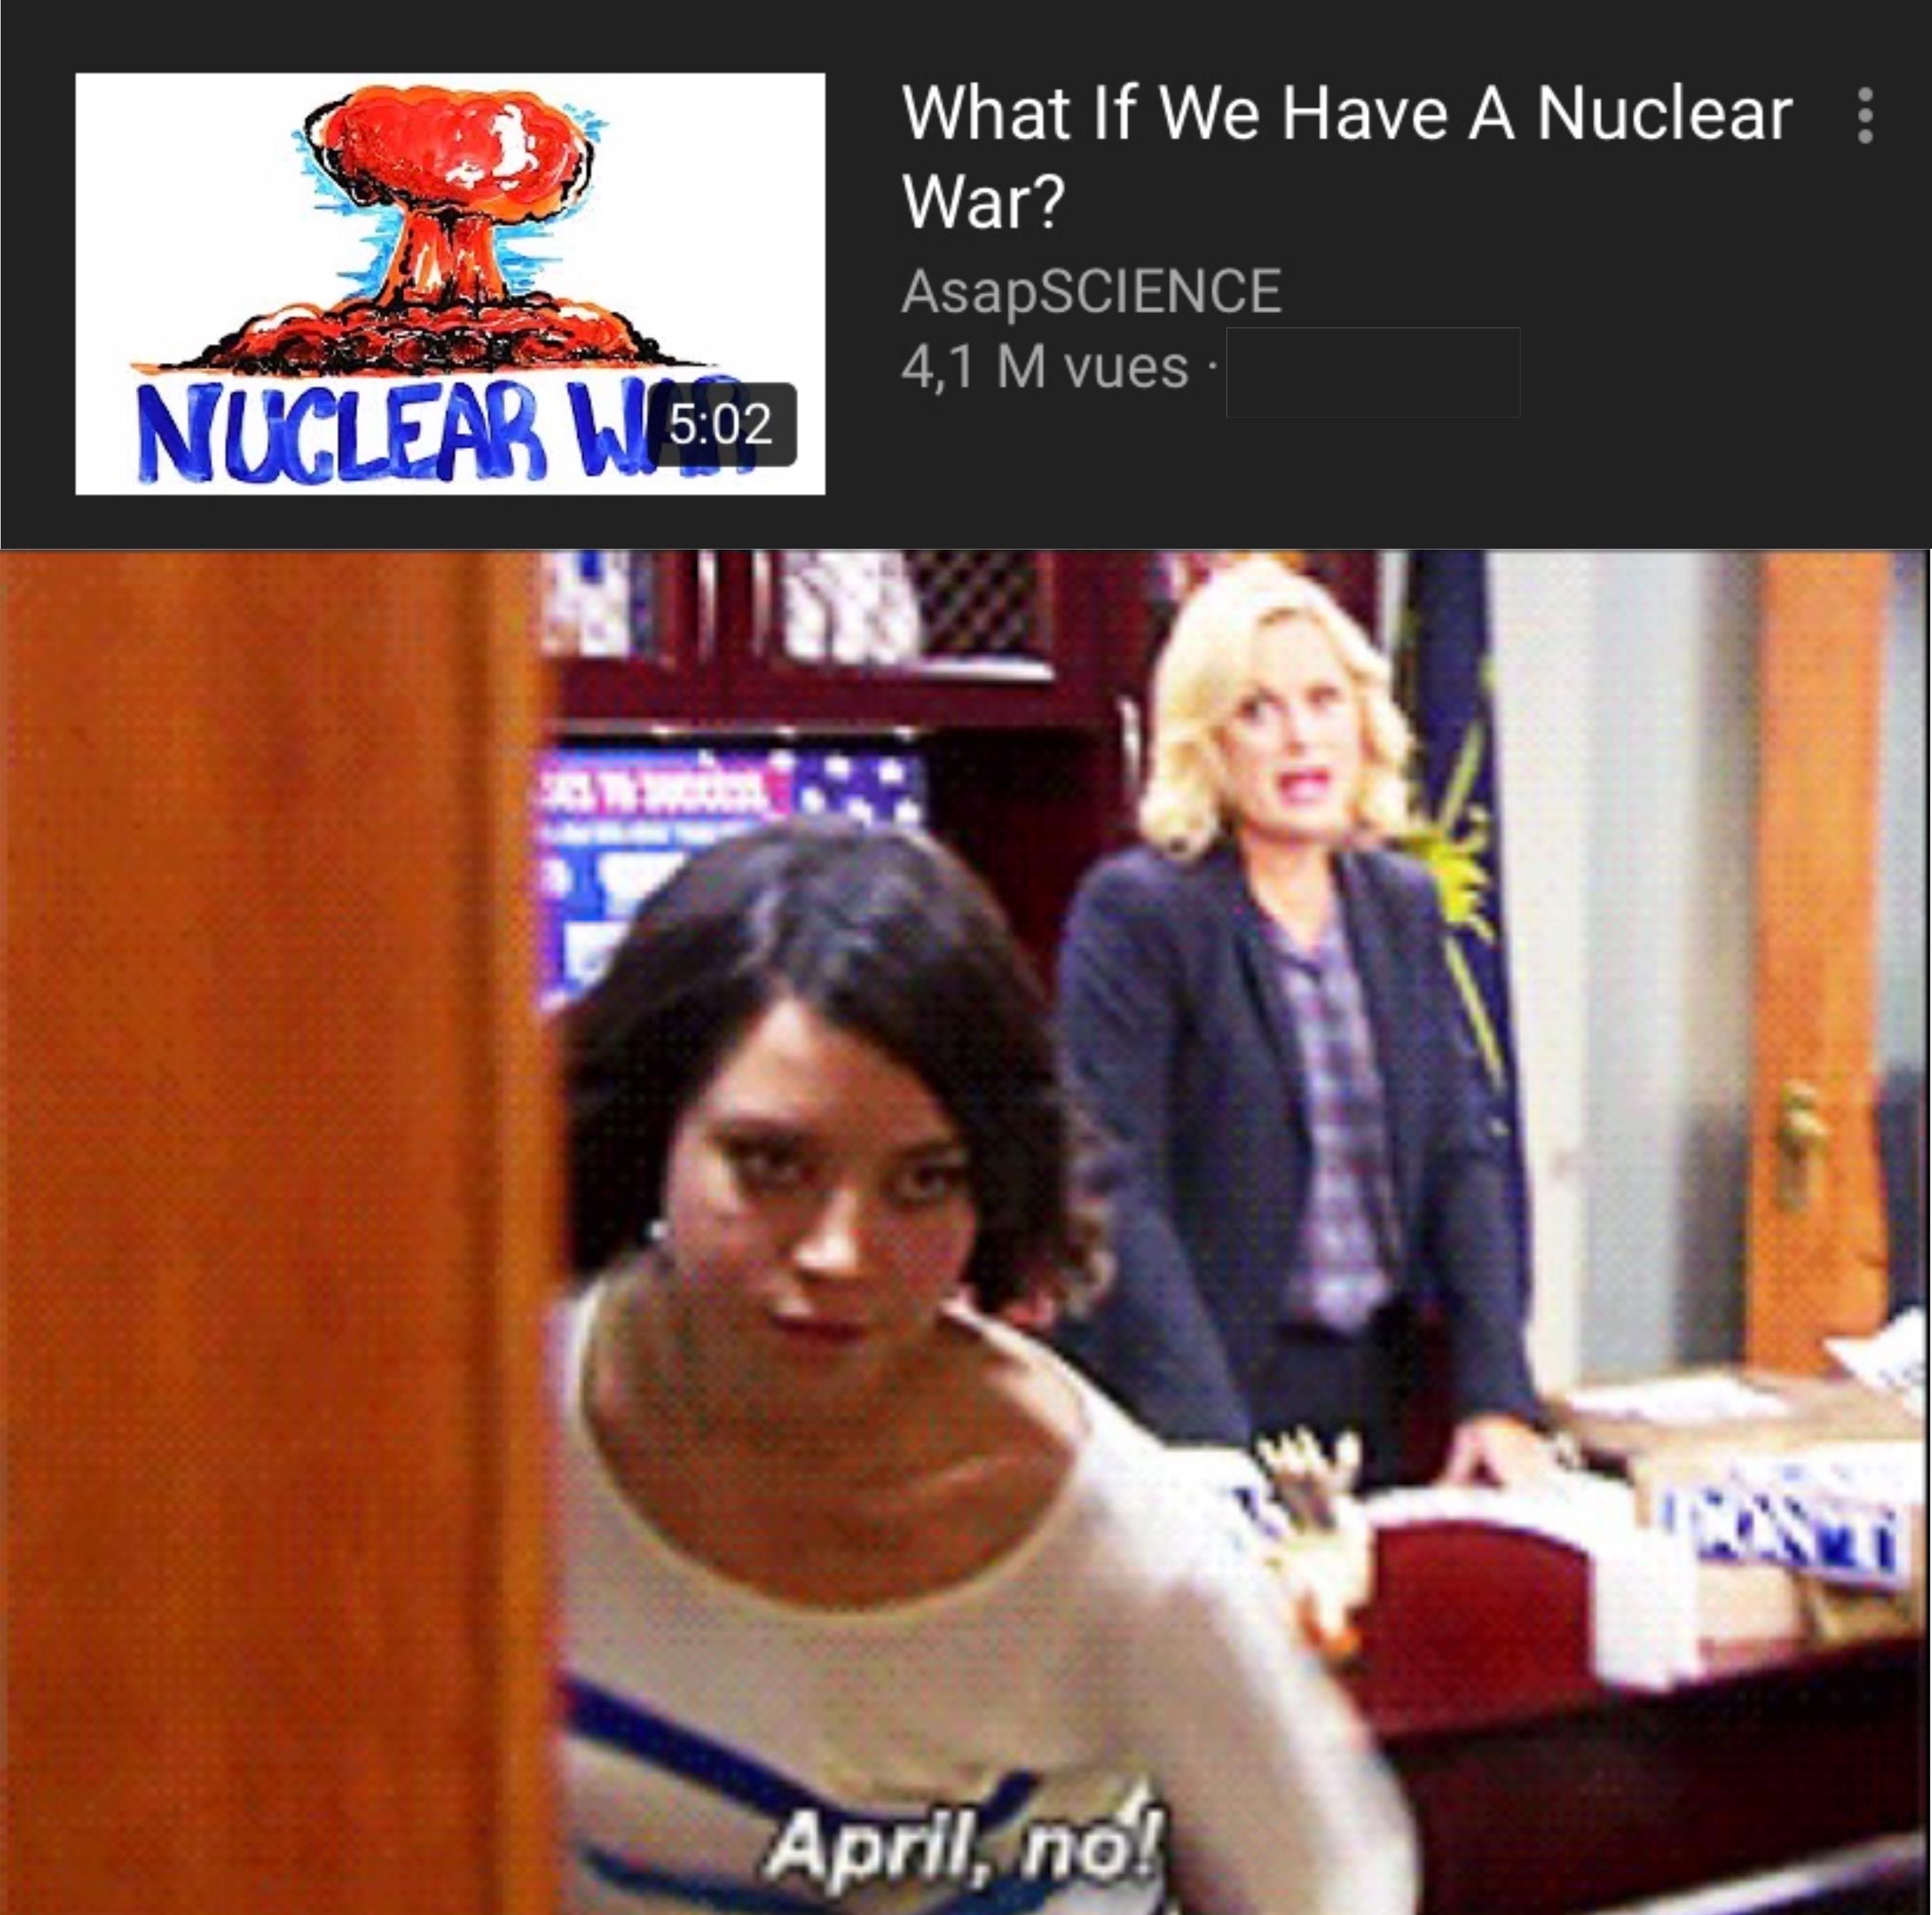 Aubrey Plaza - What If We Have A Nuclear War? AsapSCIENCE 4,1 M vues Nuclear W April, no!